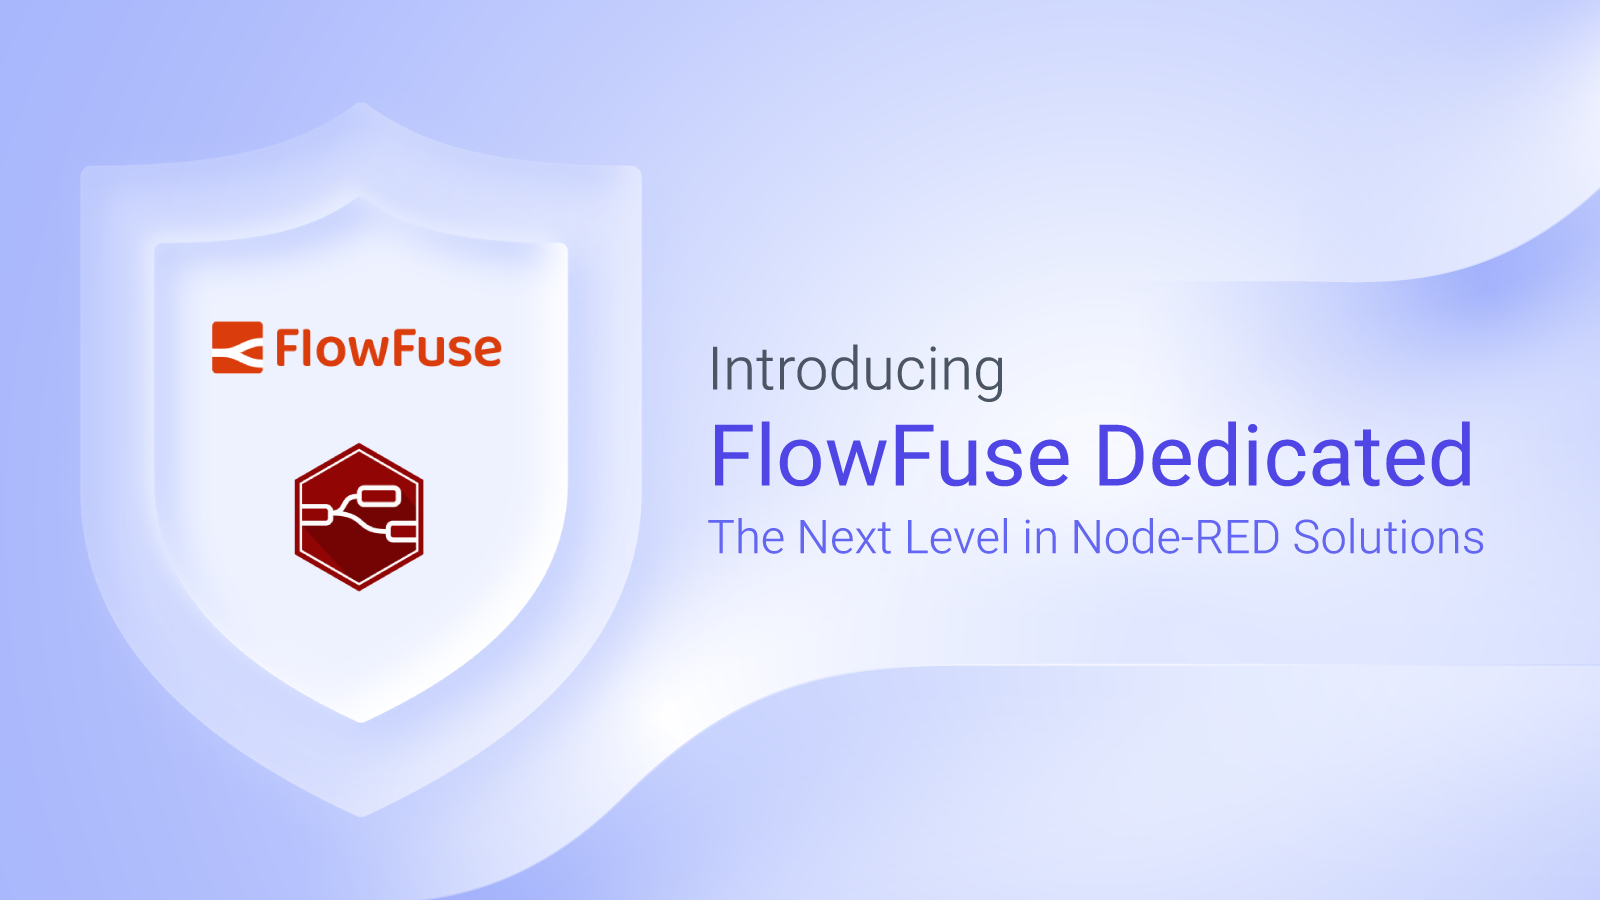 Today, we are excited to officially announce FlowFuse Dedicated, a new way to use our enterprise platform as a single-tenant SaaS offering. This new o